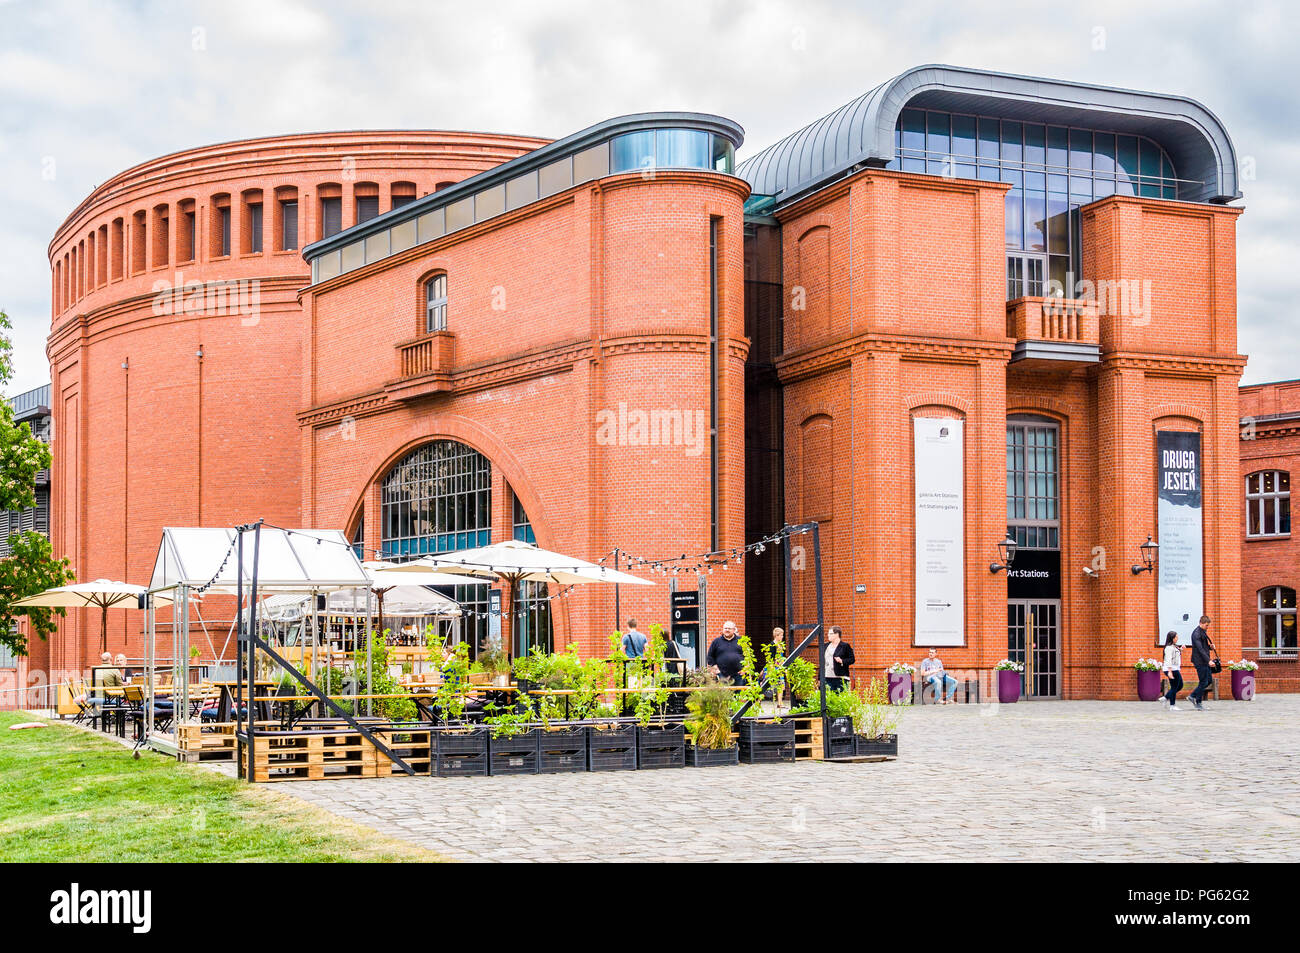 A massive red brick and glass building, part of the Stary Browar shopping centre in Poznań (Poznan), Poland Stock Photo